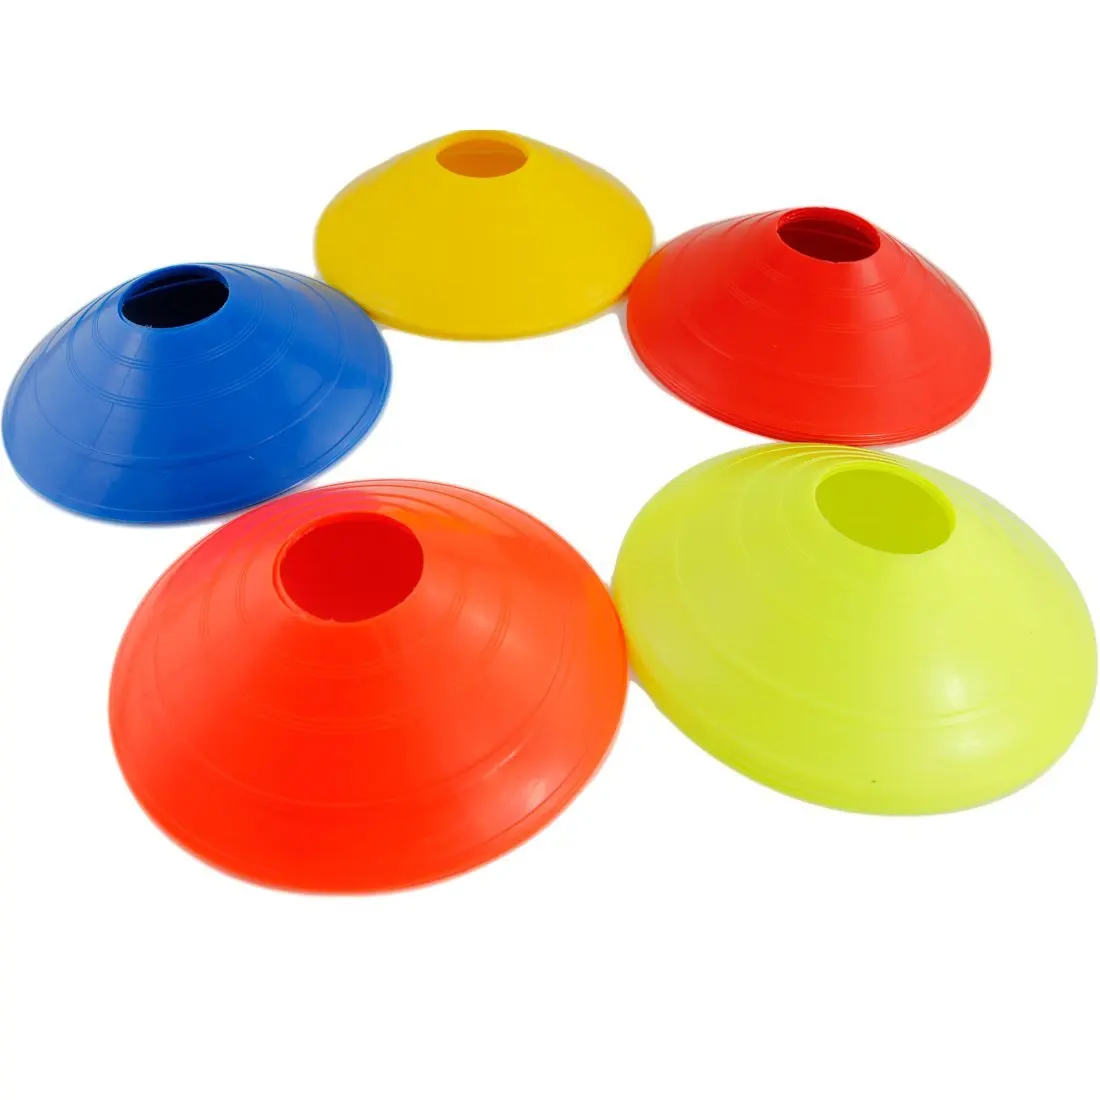 Cheap Plastic Sports Cones, find Plastic Sports Cones deals on line at ...